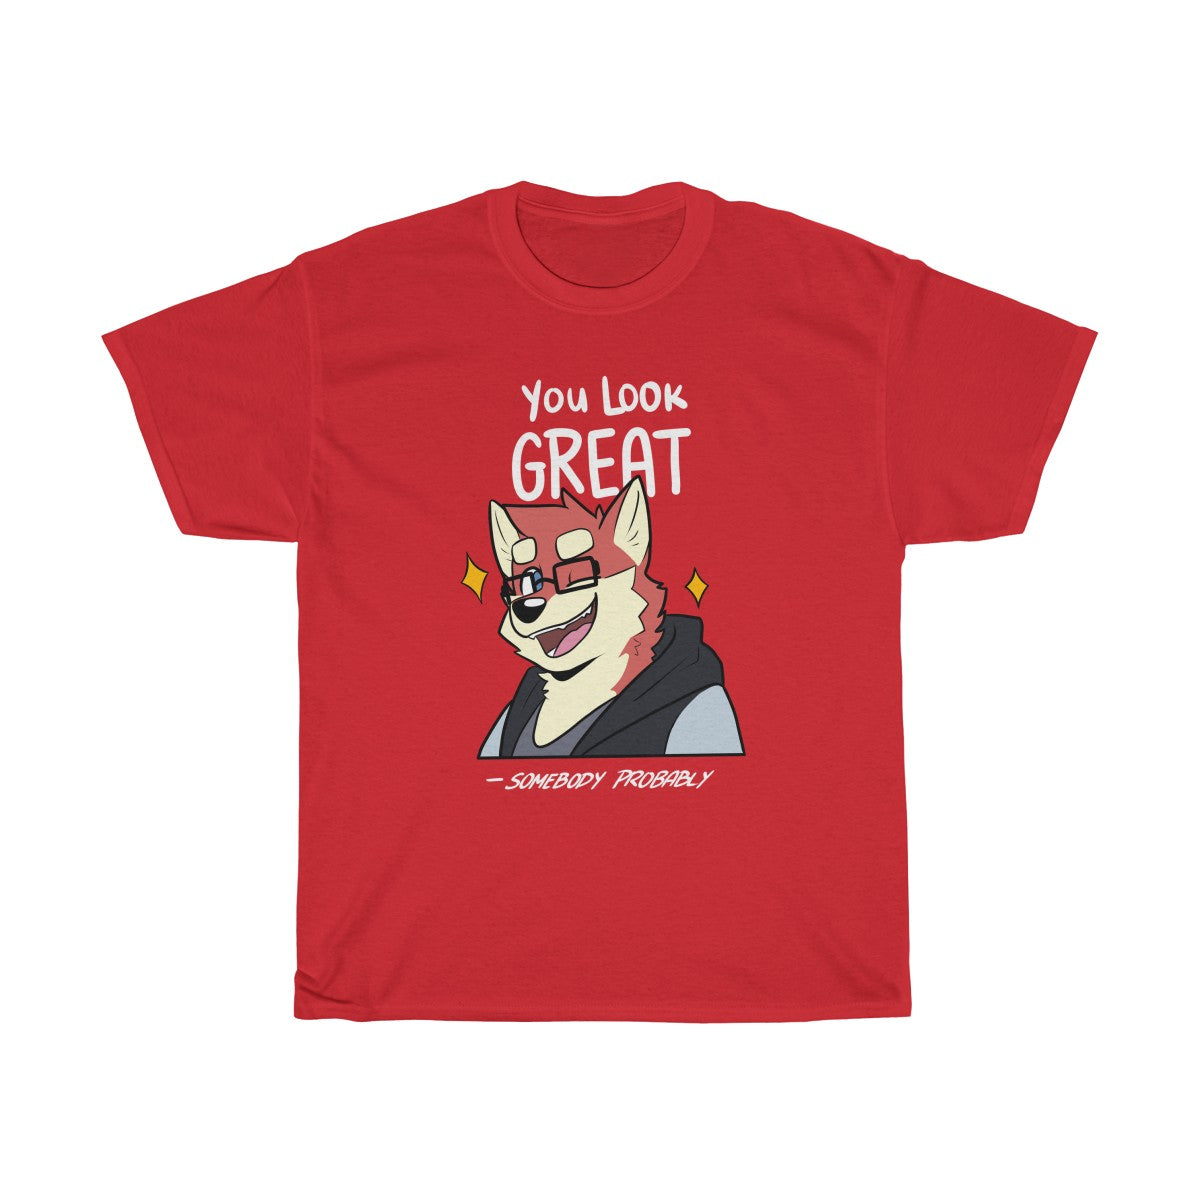 You Look Great - T-Shirt T-Shirt Ooka Red S 